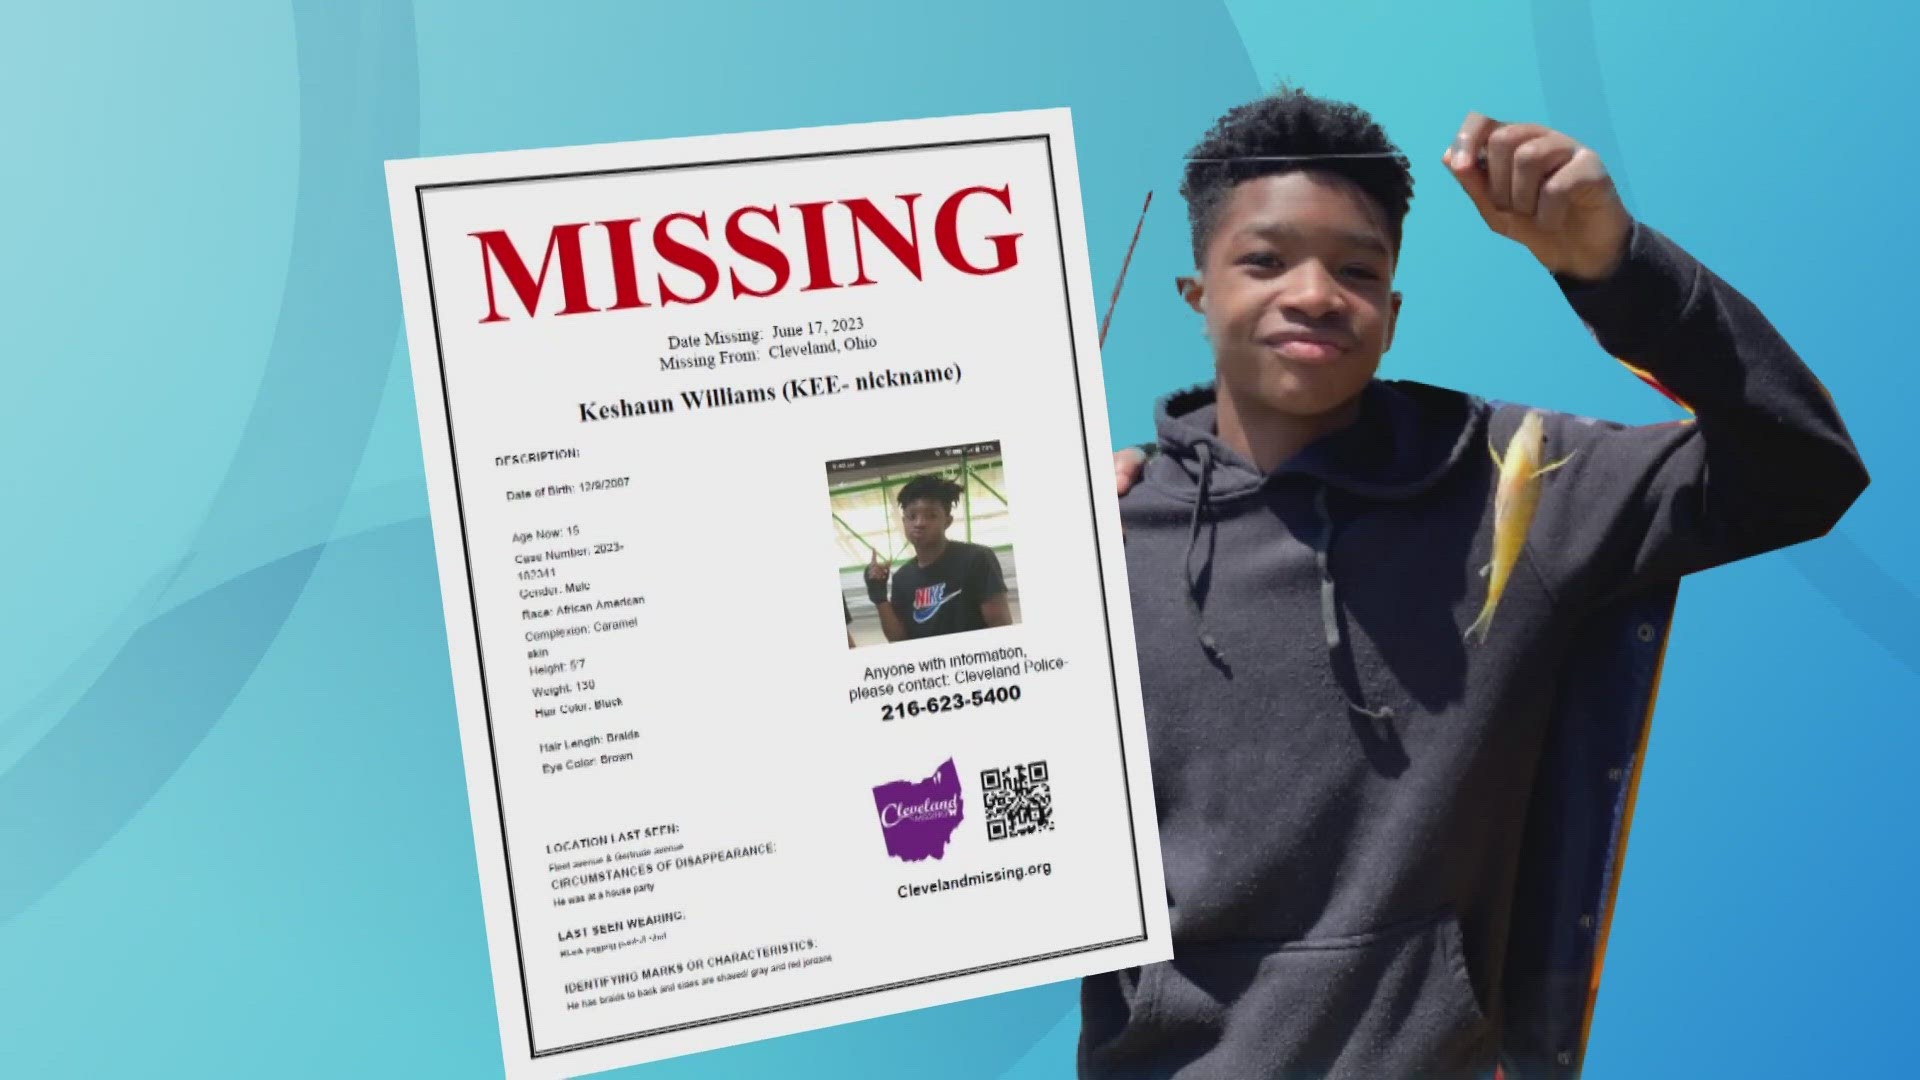 The search continues for missing Cleveland teen Keshaun Williams after an Amber Alert was issued last June.